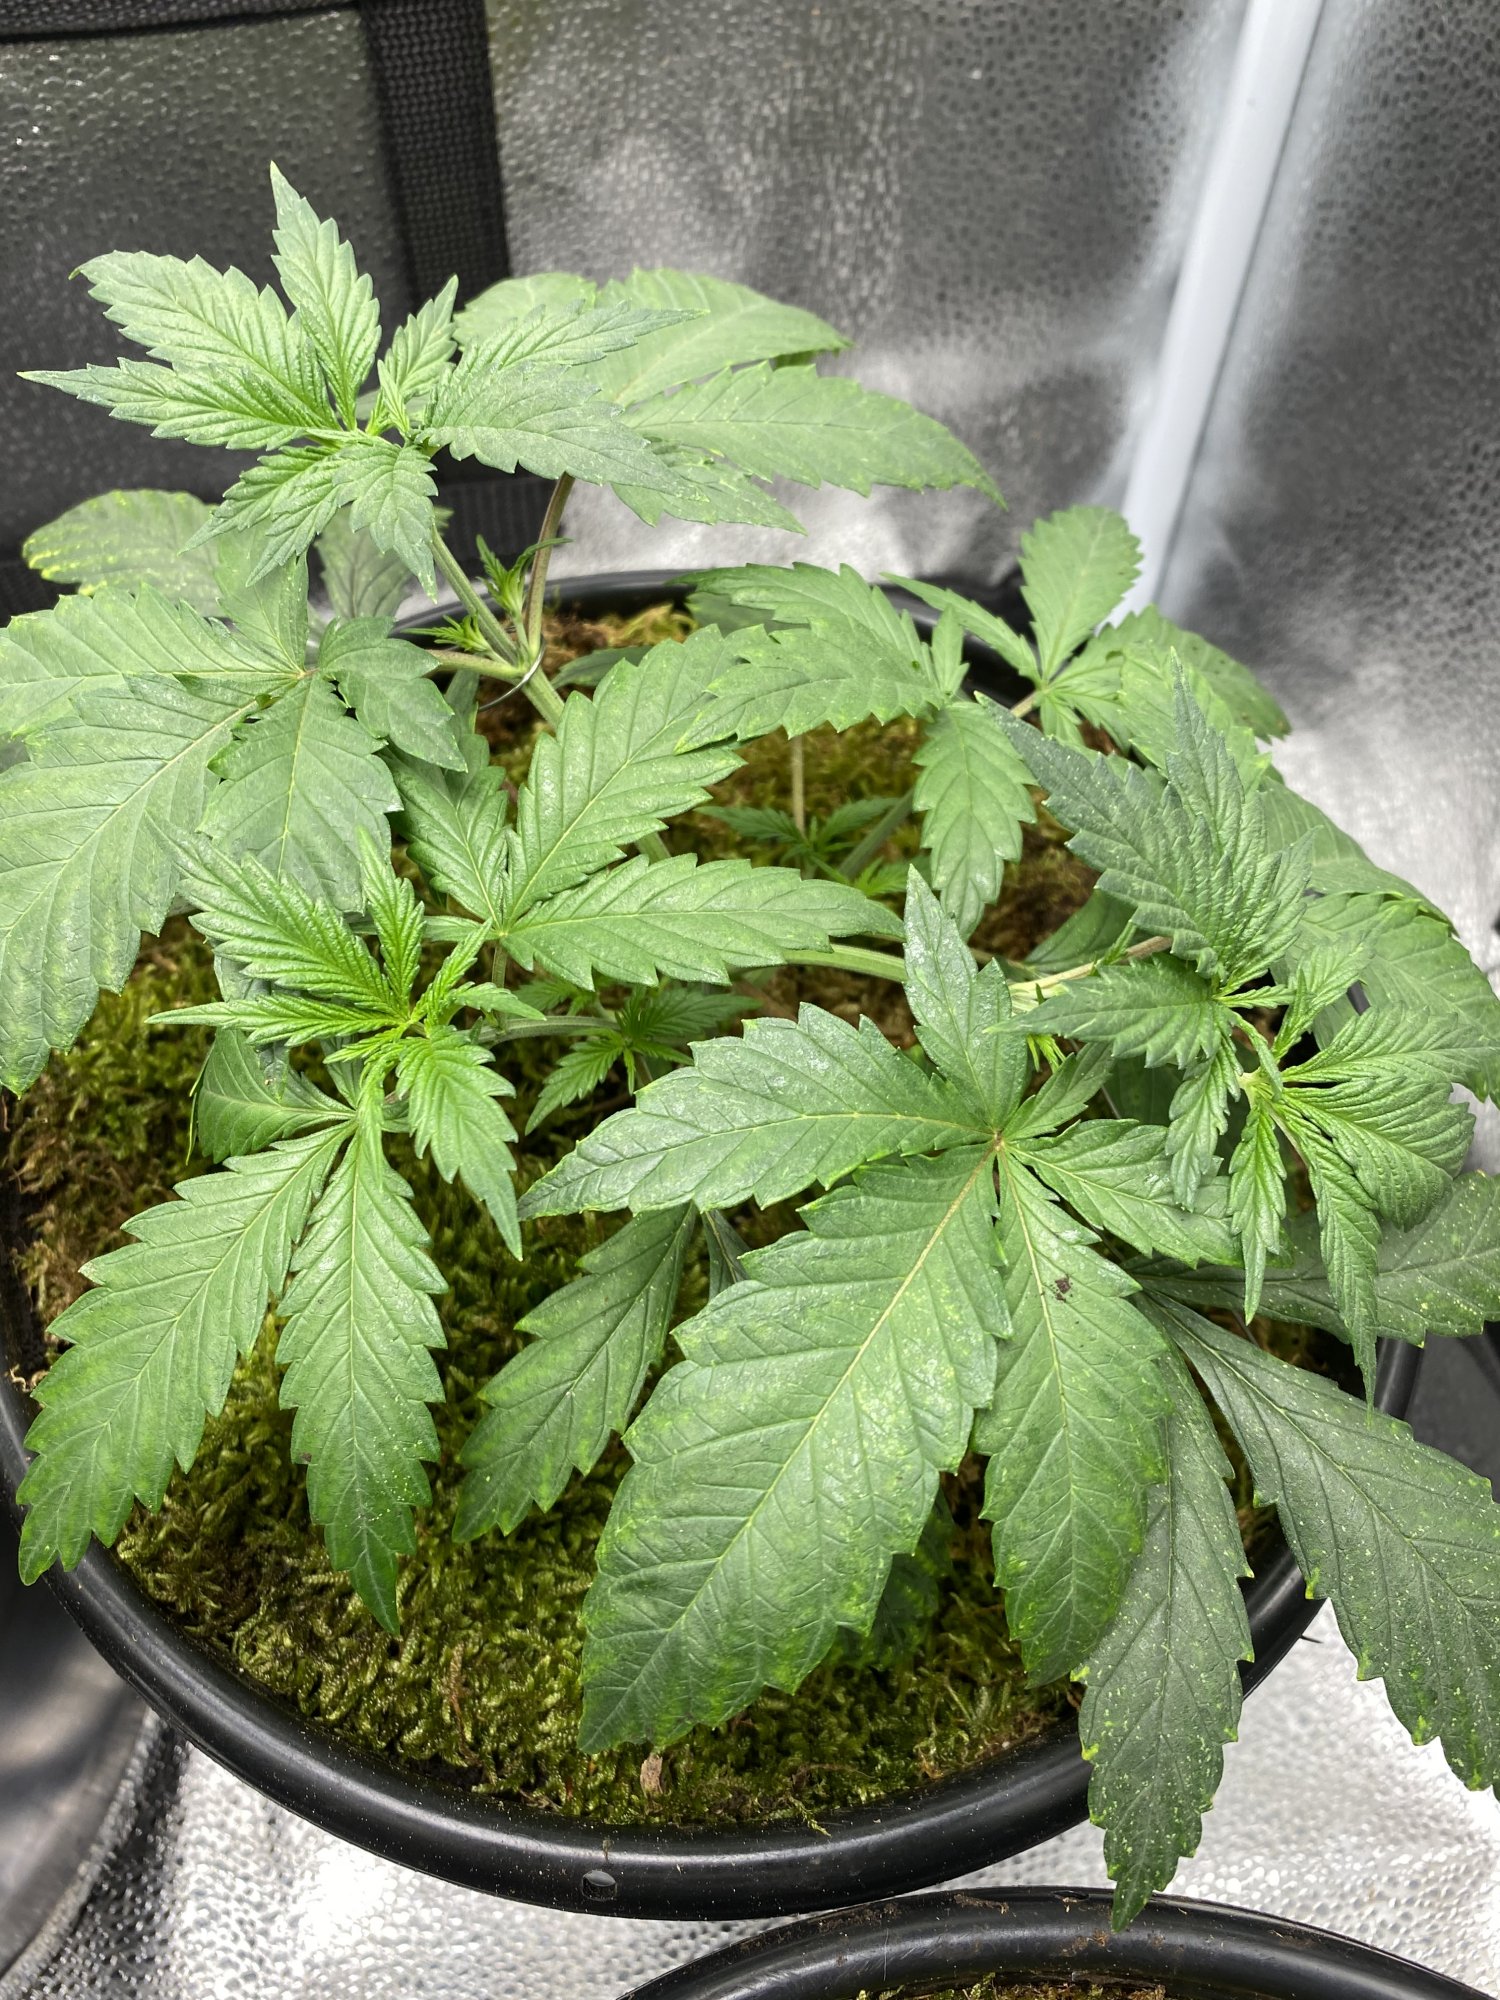 White widow grow with question 3